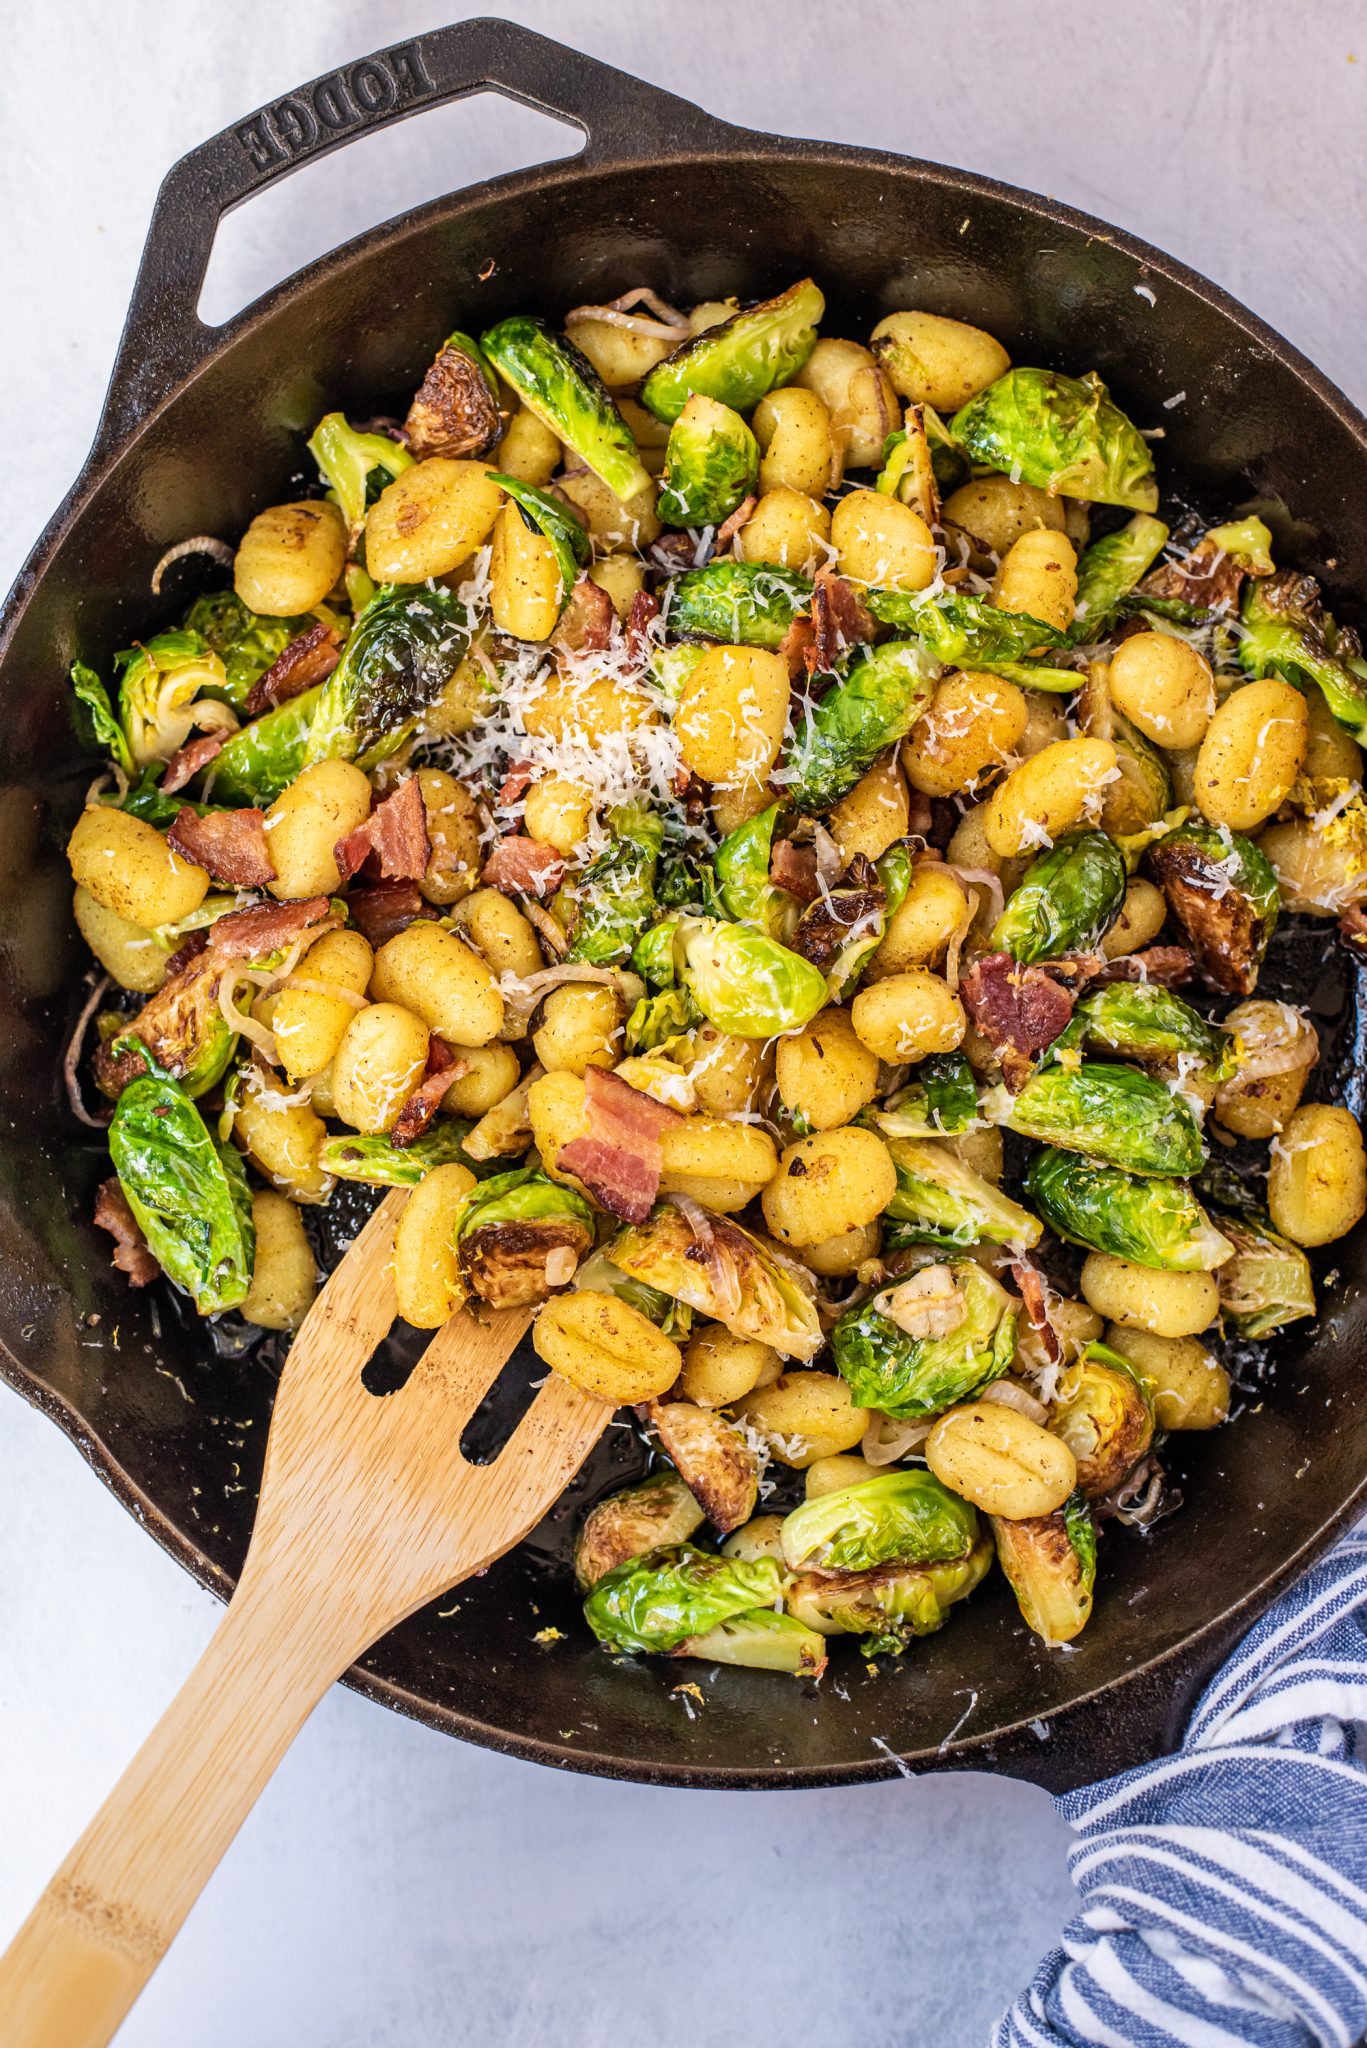 Skillet Gnocchi With Brussels Sprouts Pumpkin N Spice